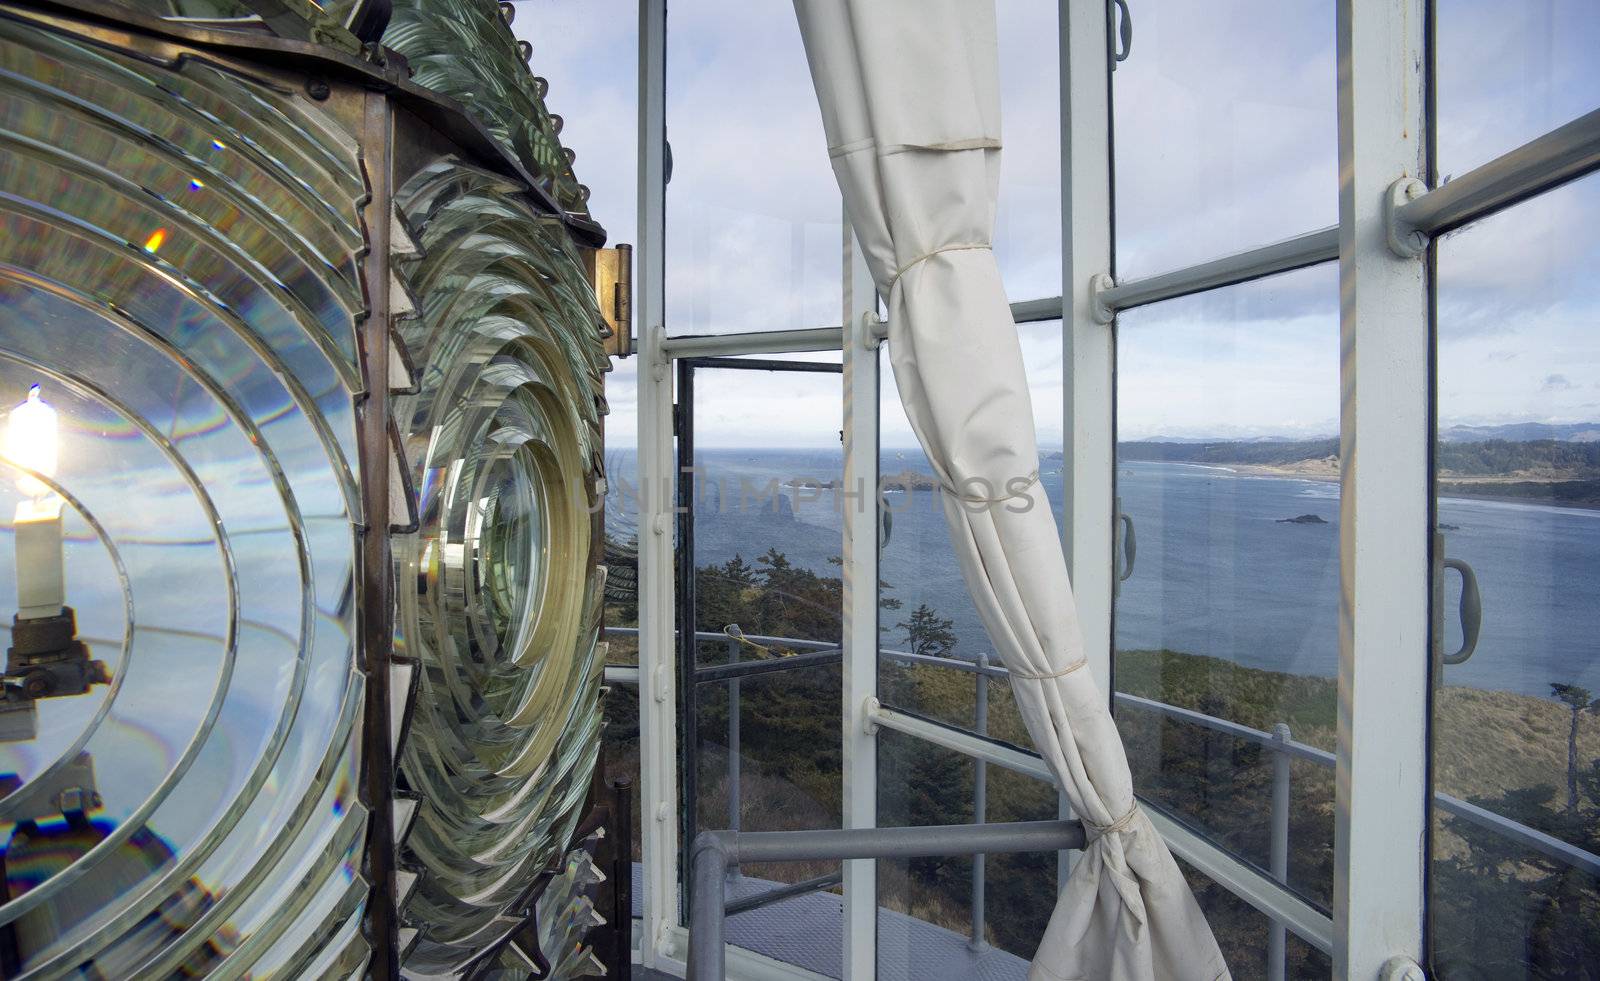 The top Lens housing on a West Coast Lighthouse